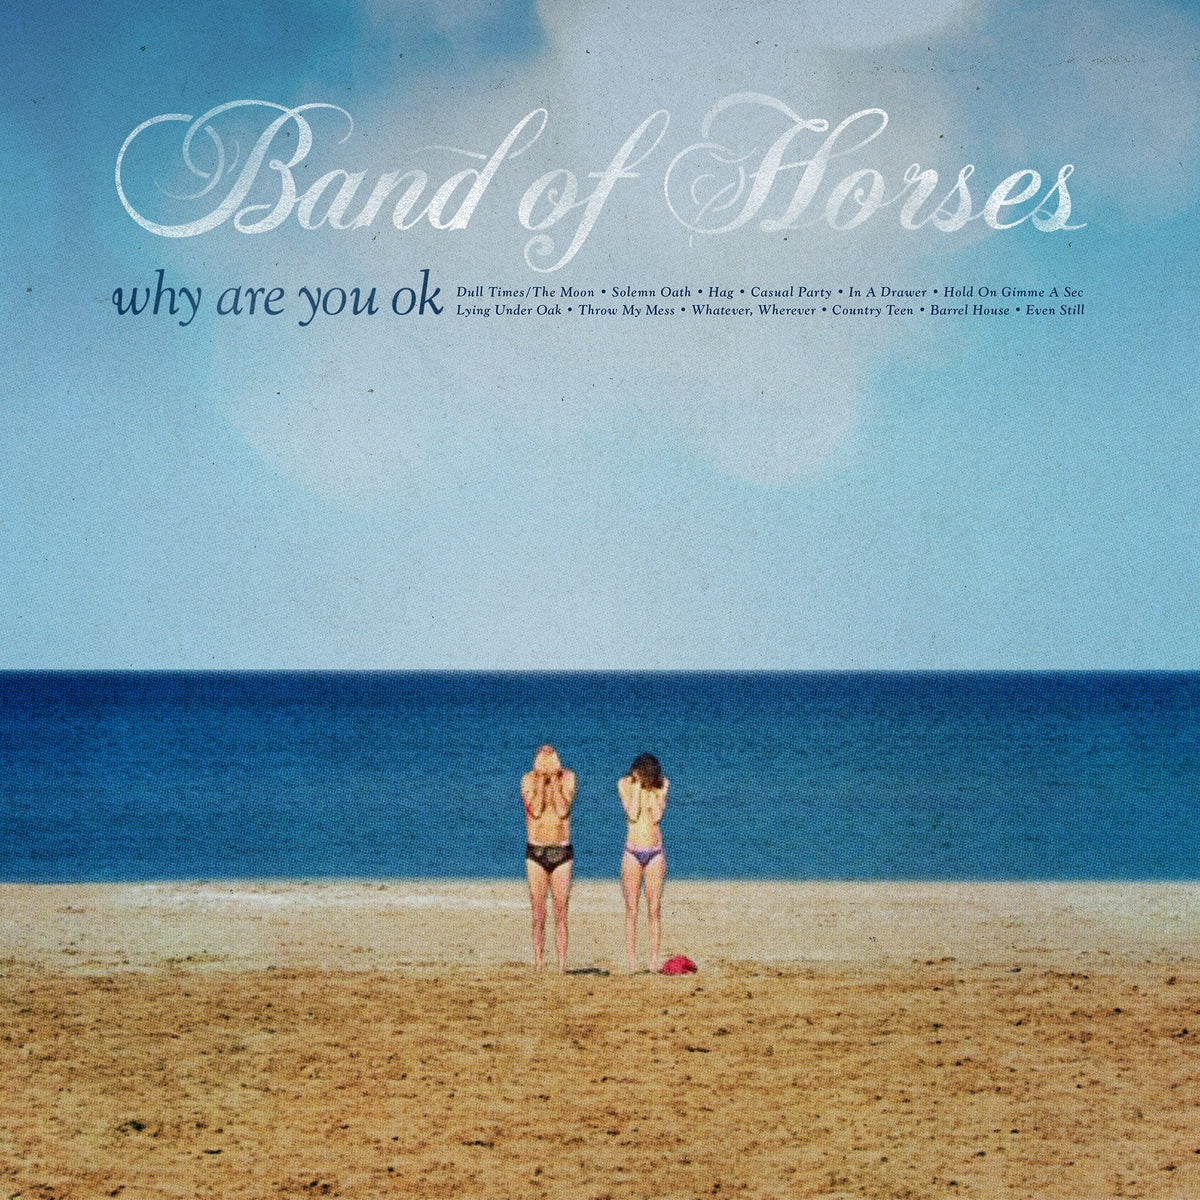 Band Of Horses Ride Again, And We're Glad They're Back